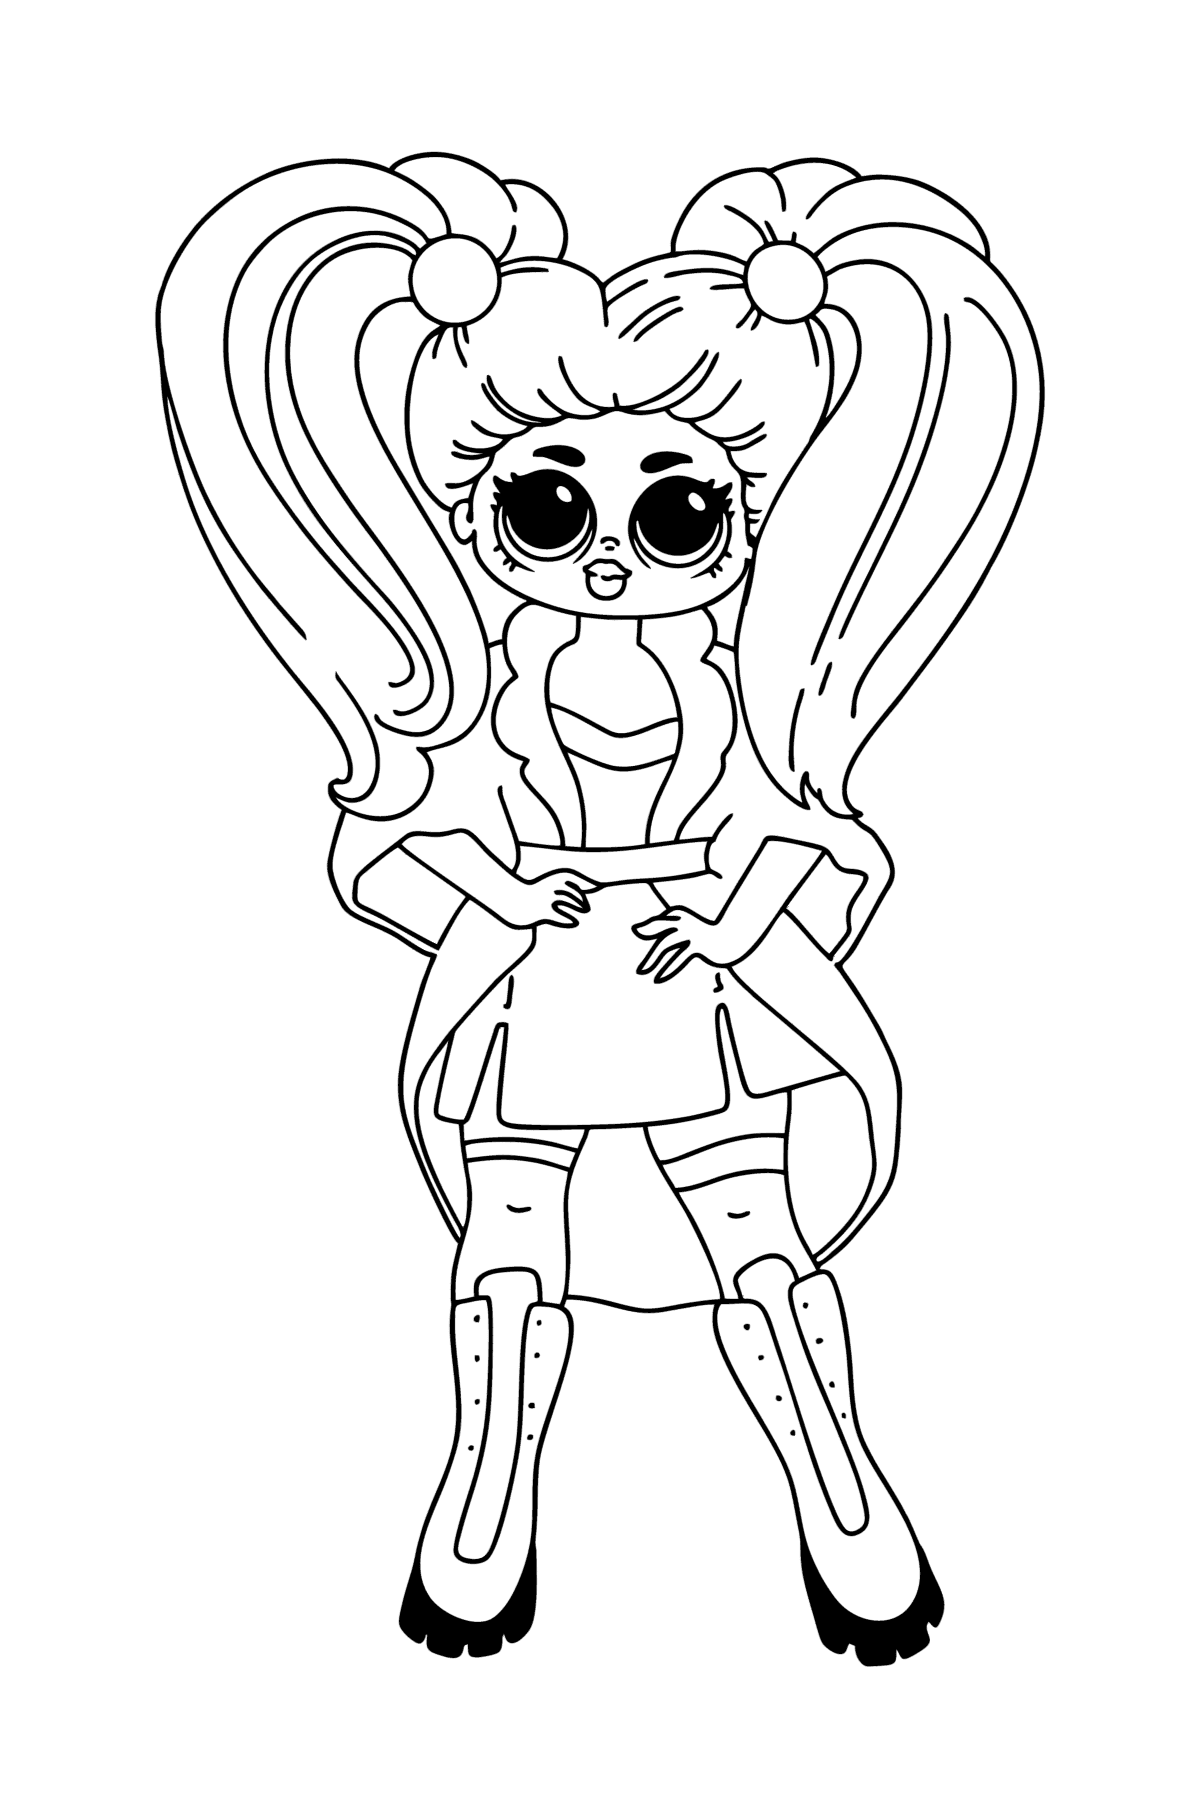 Coloring page LOL OMG Doll - Coloring Pages for Kids